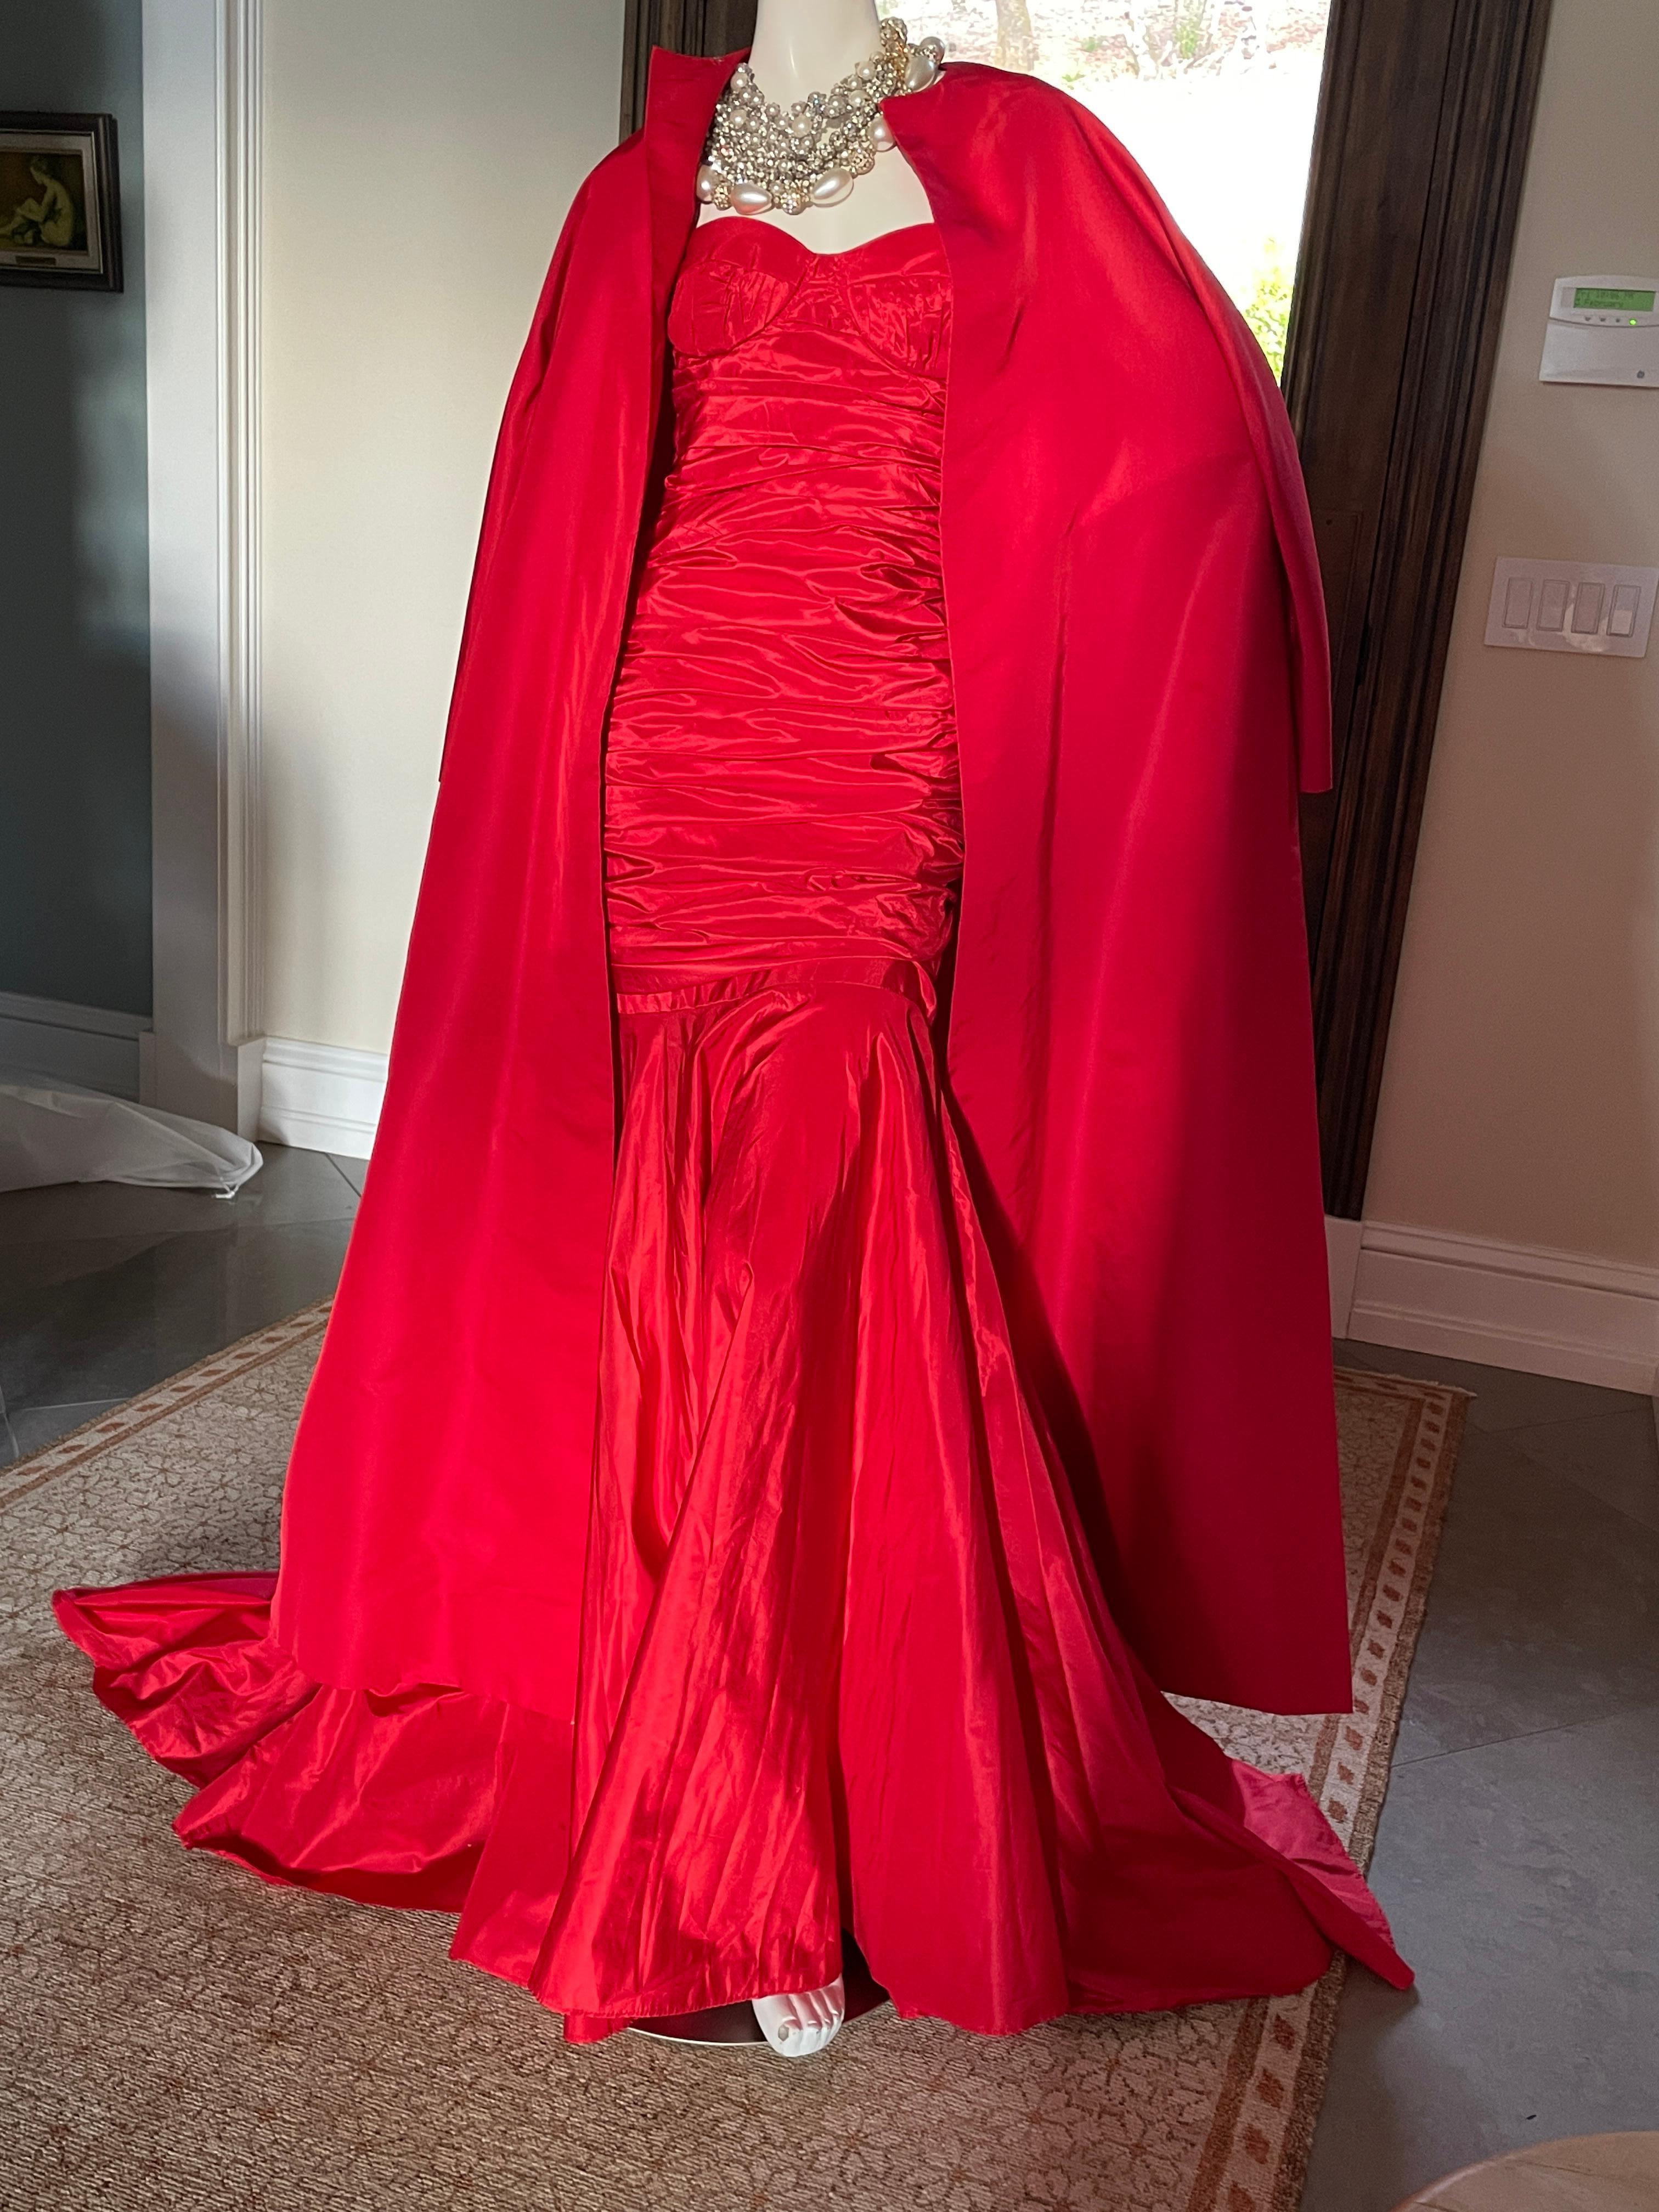 Michael Kors Dramatic Vintage Strapless Red Silk Mermaid Dress w Fishtail Train In New Condition In Cloverdale, CA